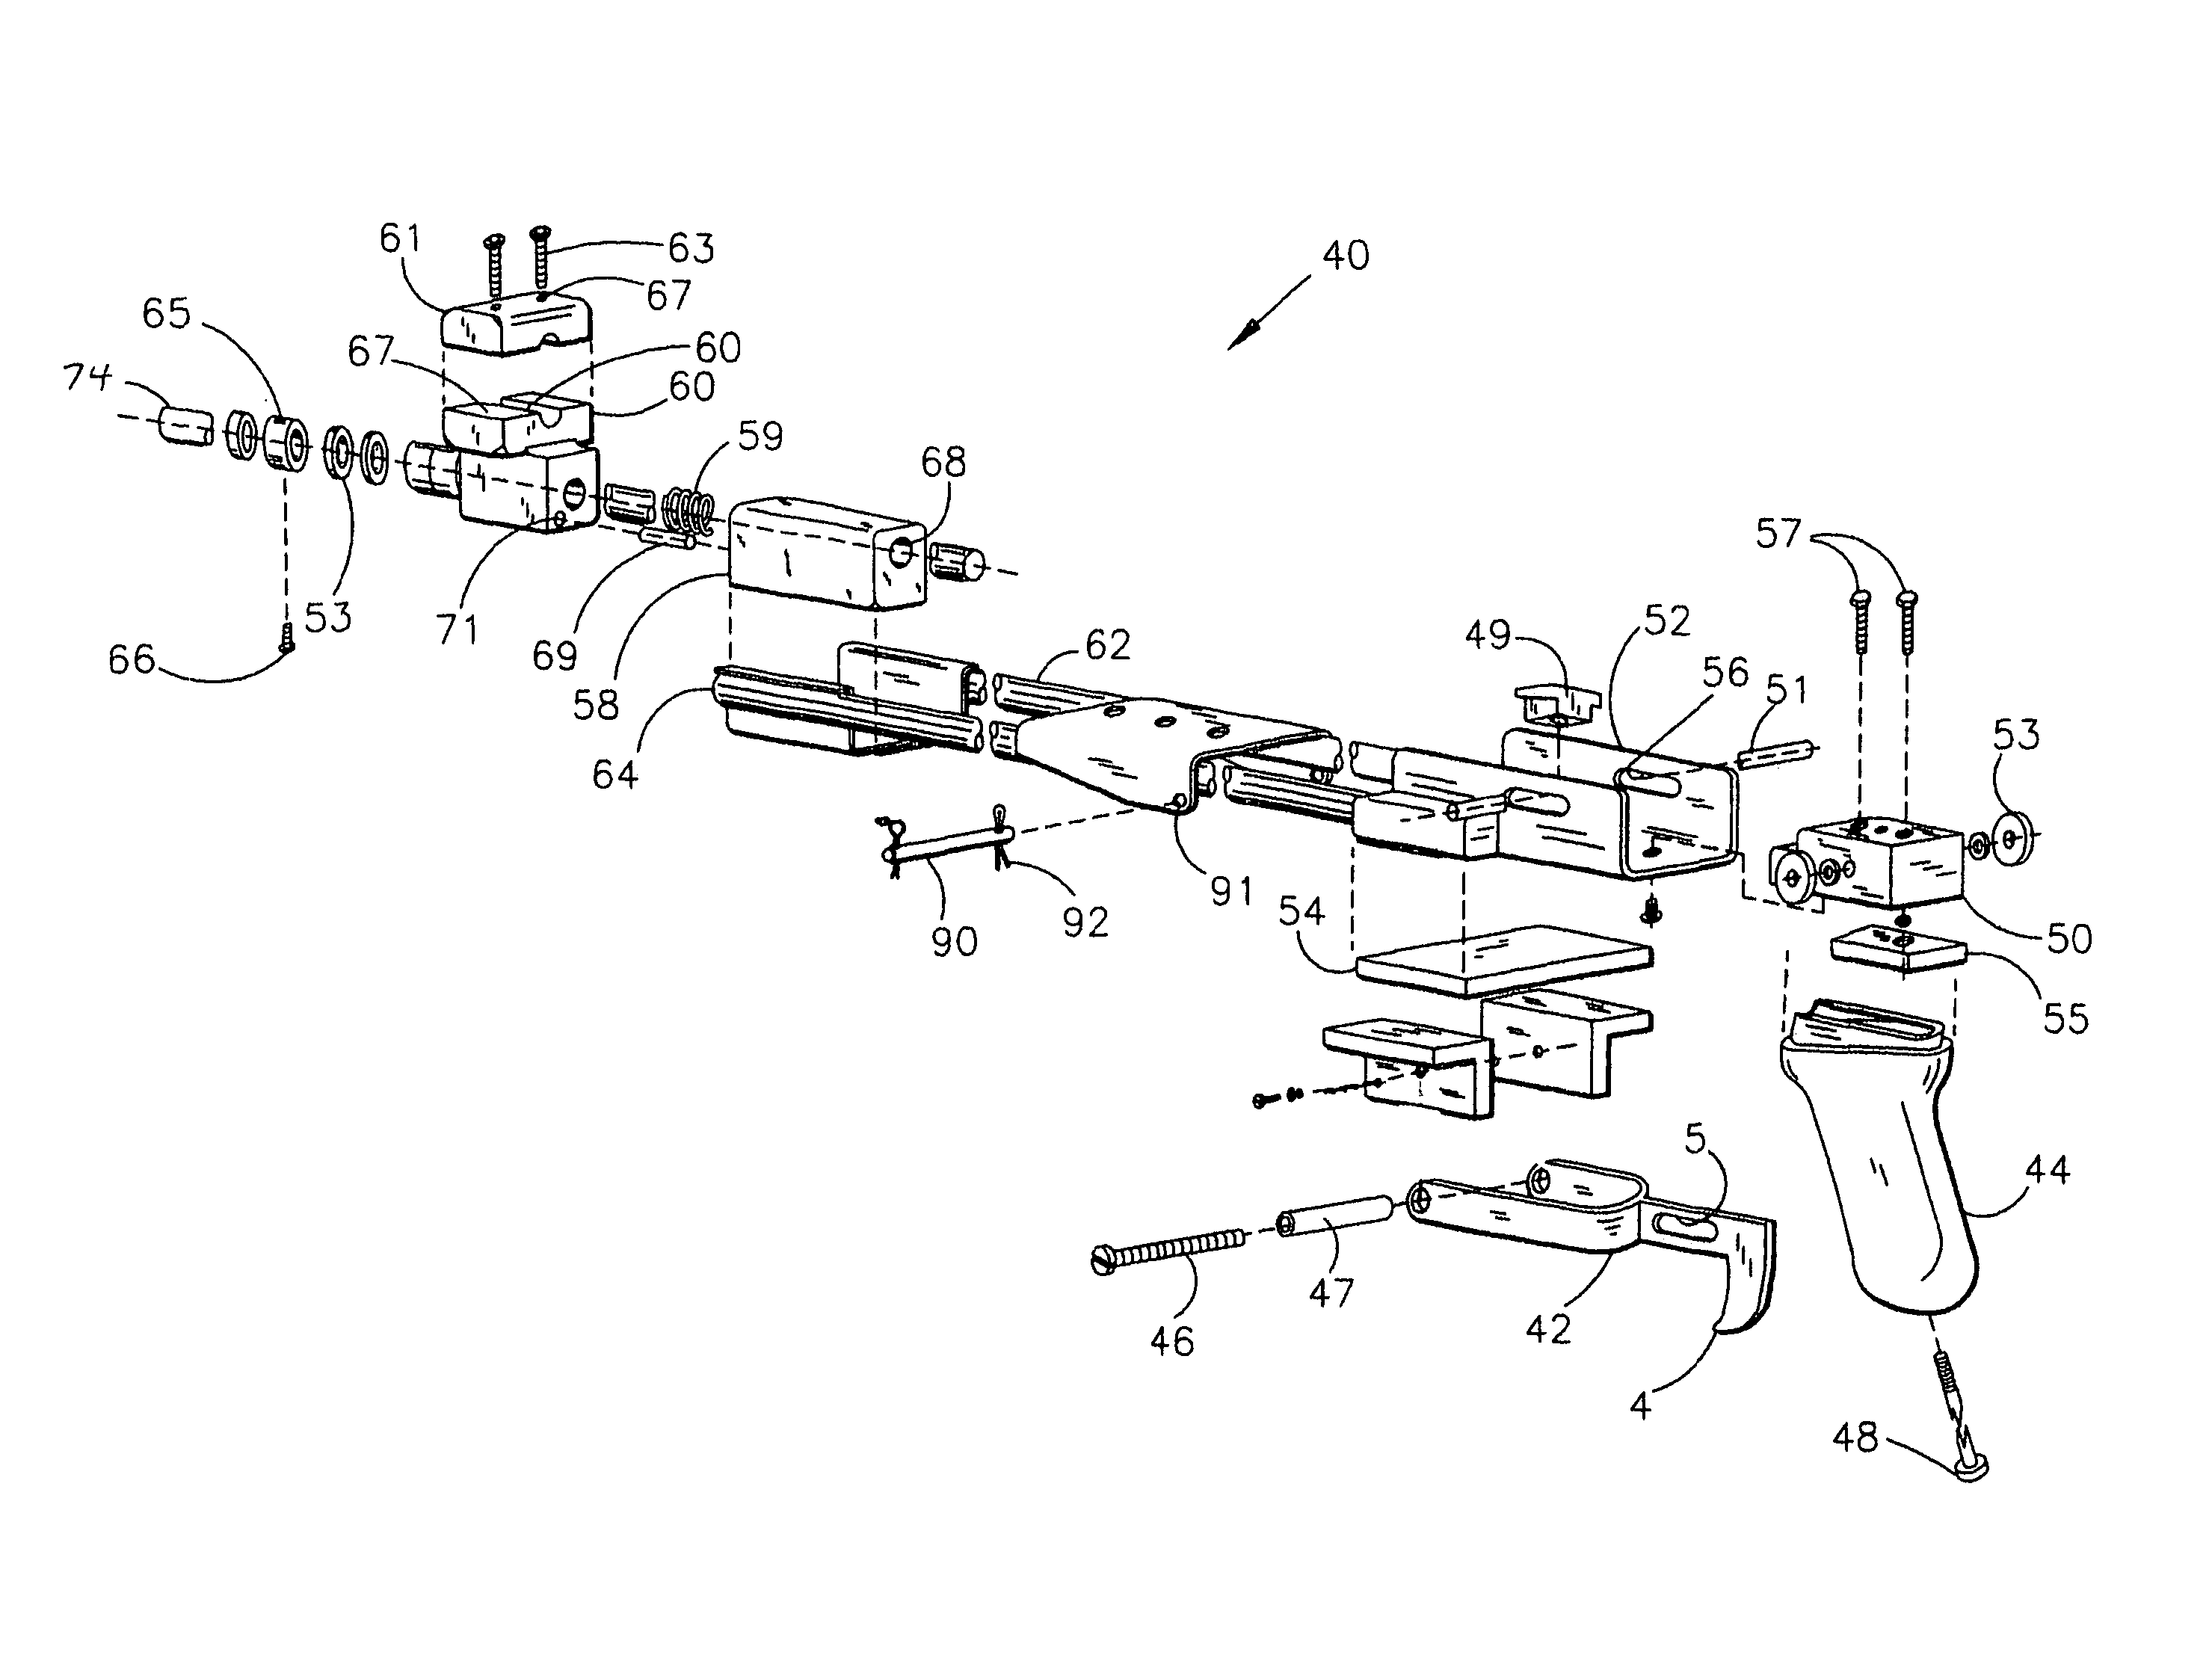 Method and device for increasing the rate of the firing cycle of a semi-automatic firearm